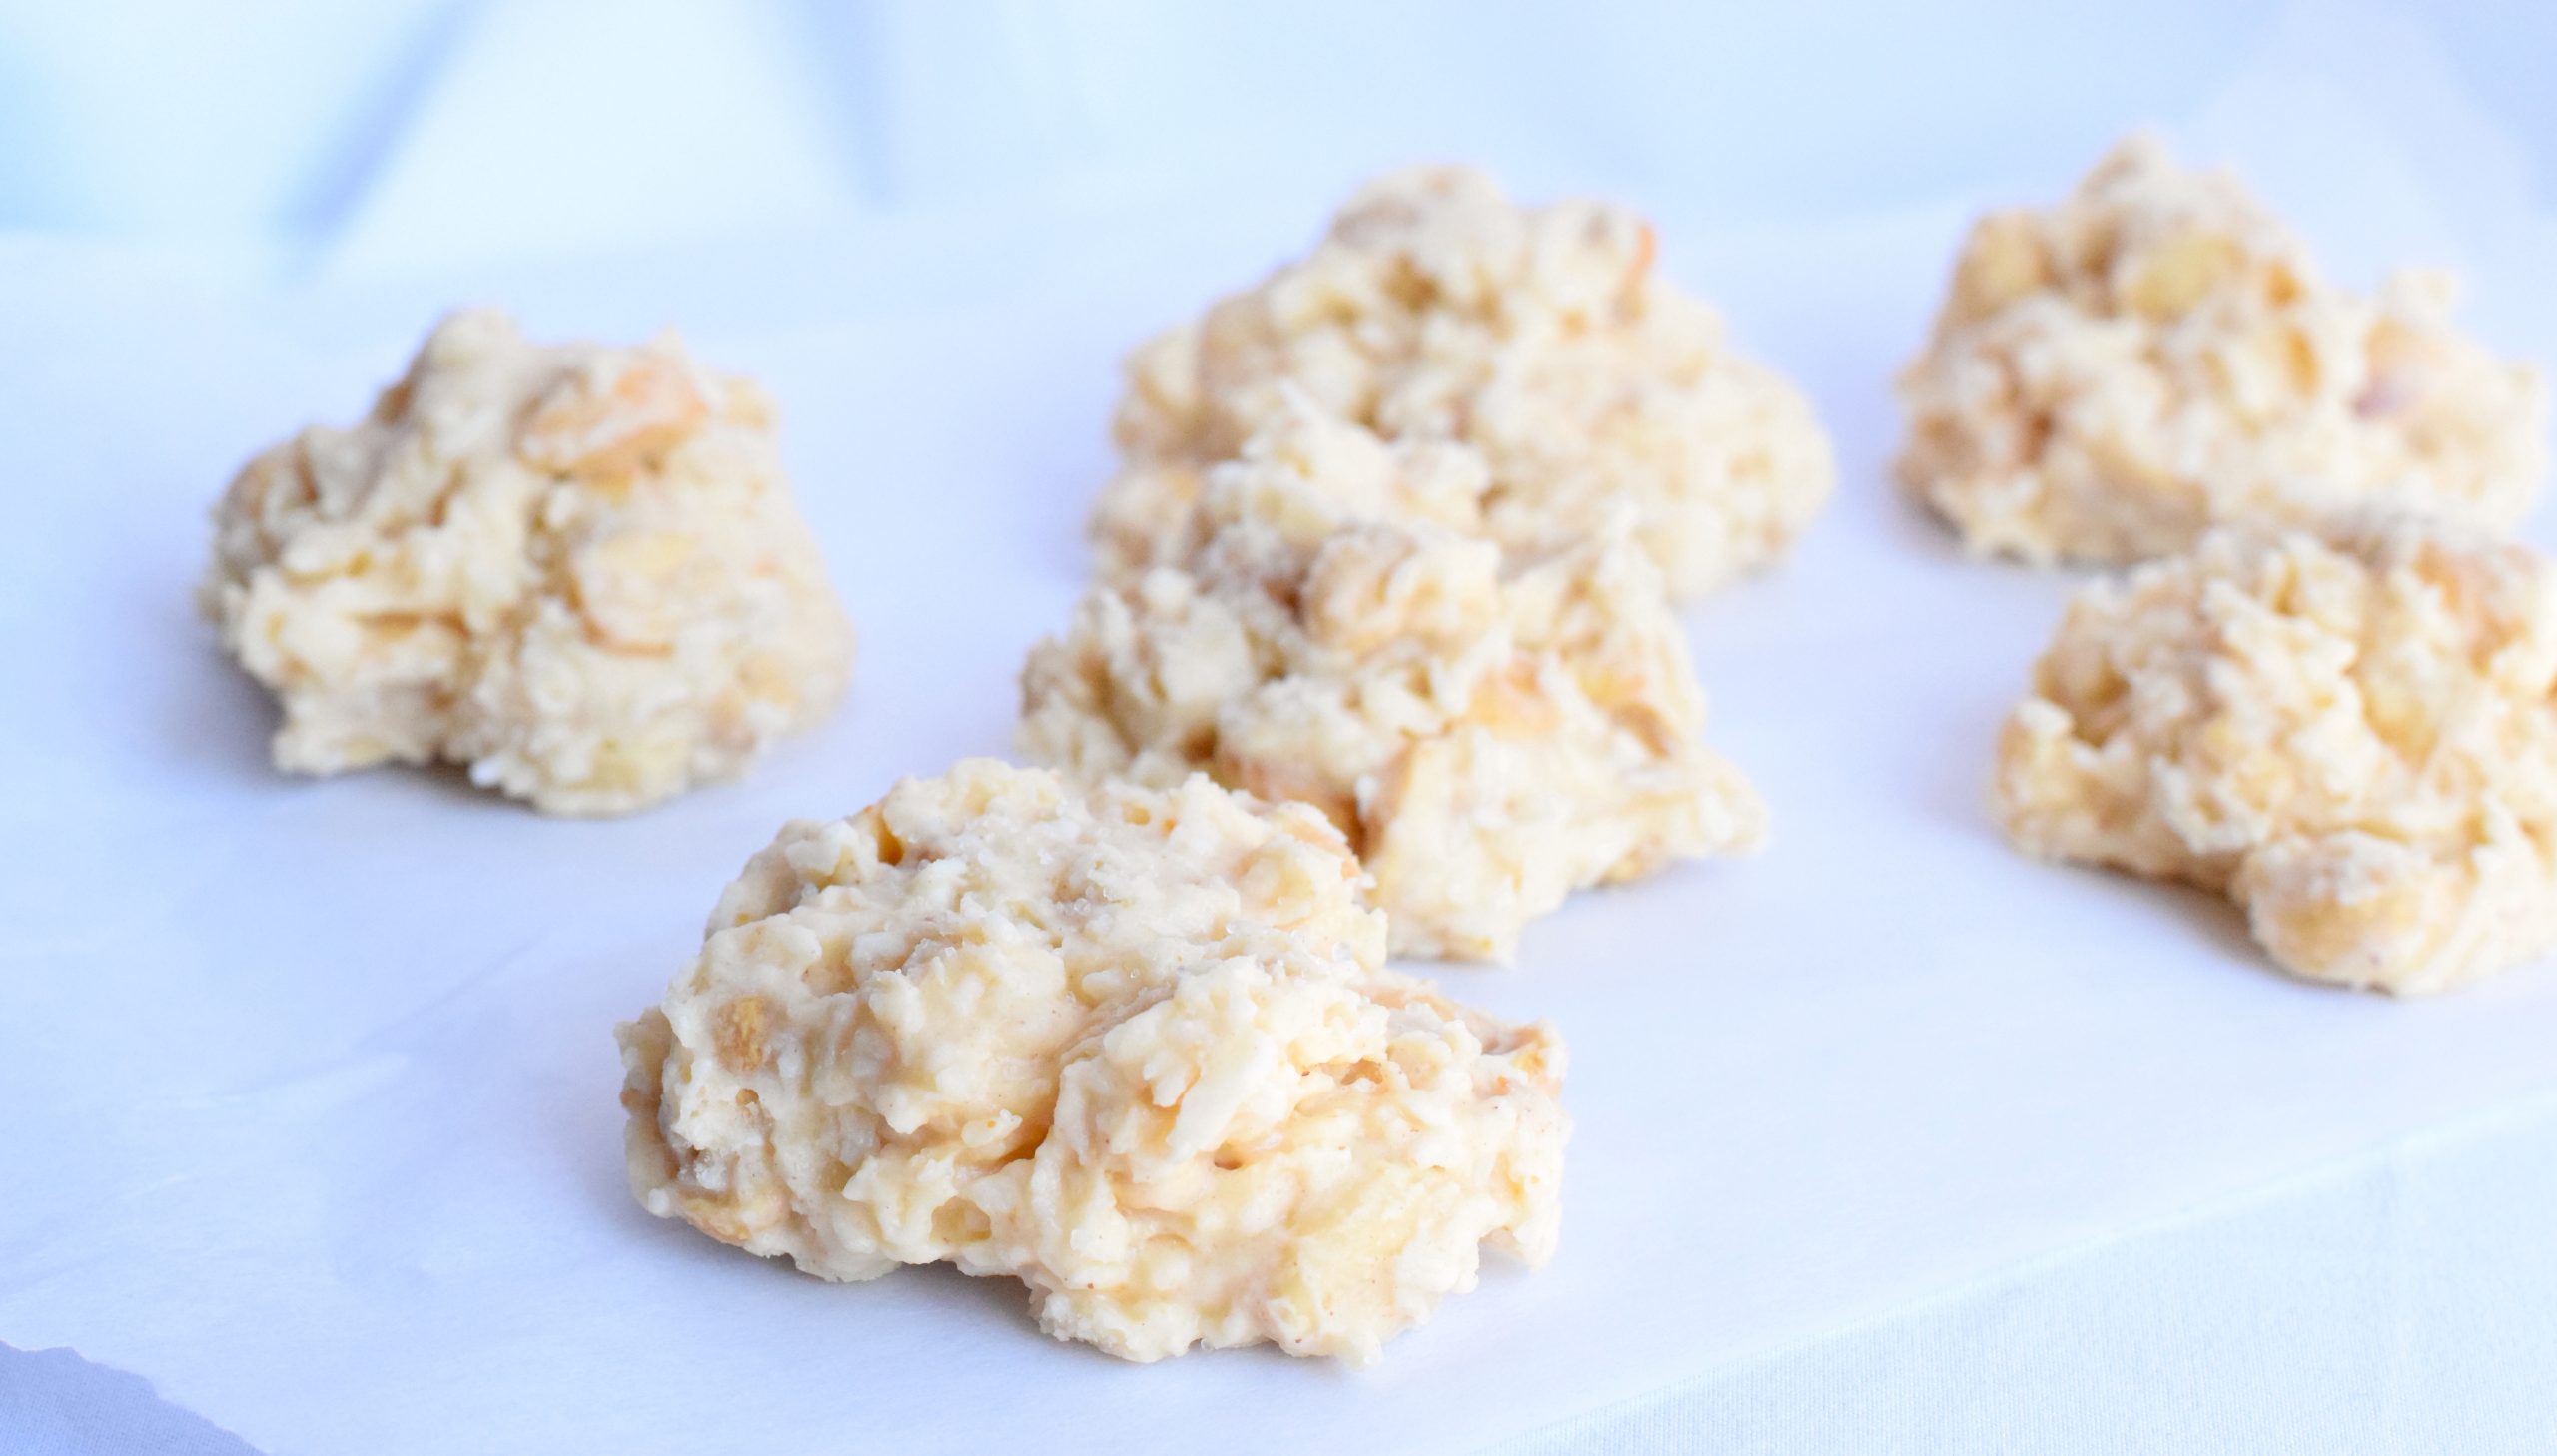 Keto White Chocolate Peanut Butter Clusters